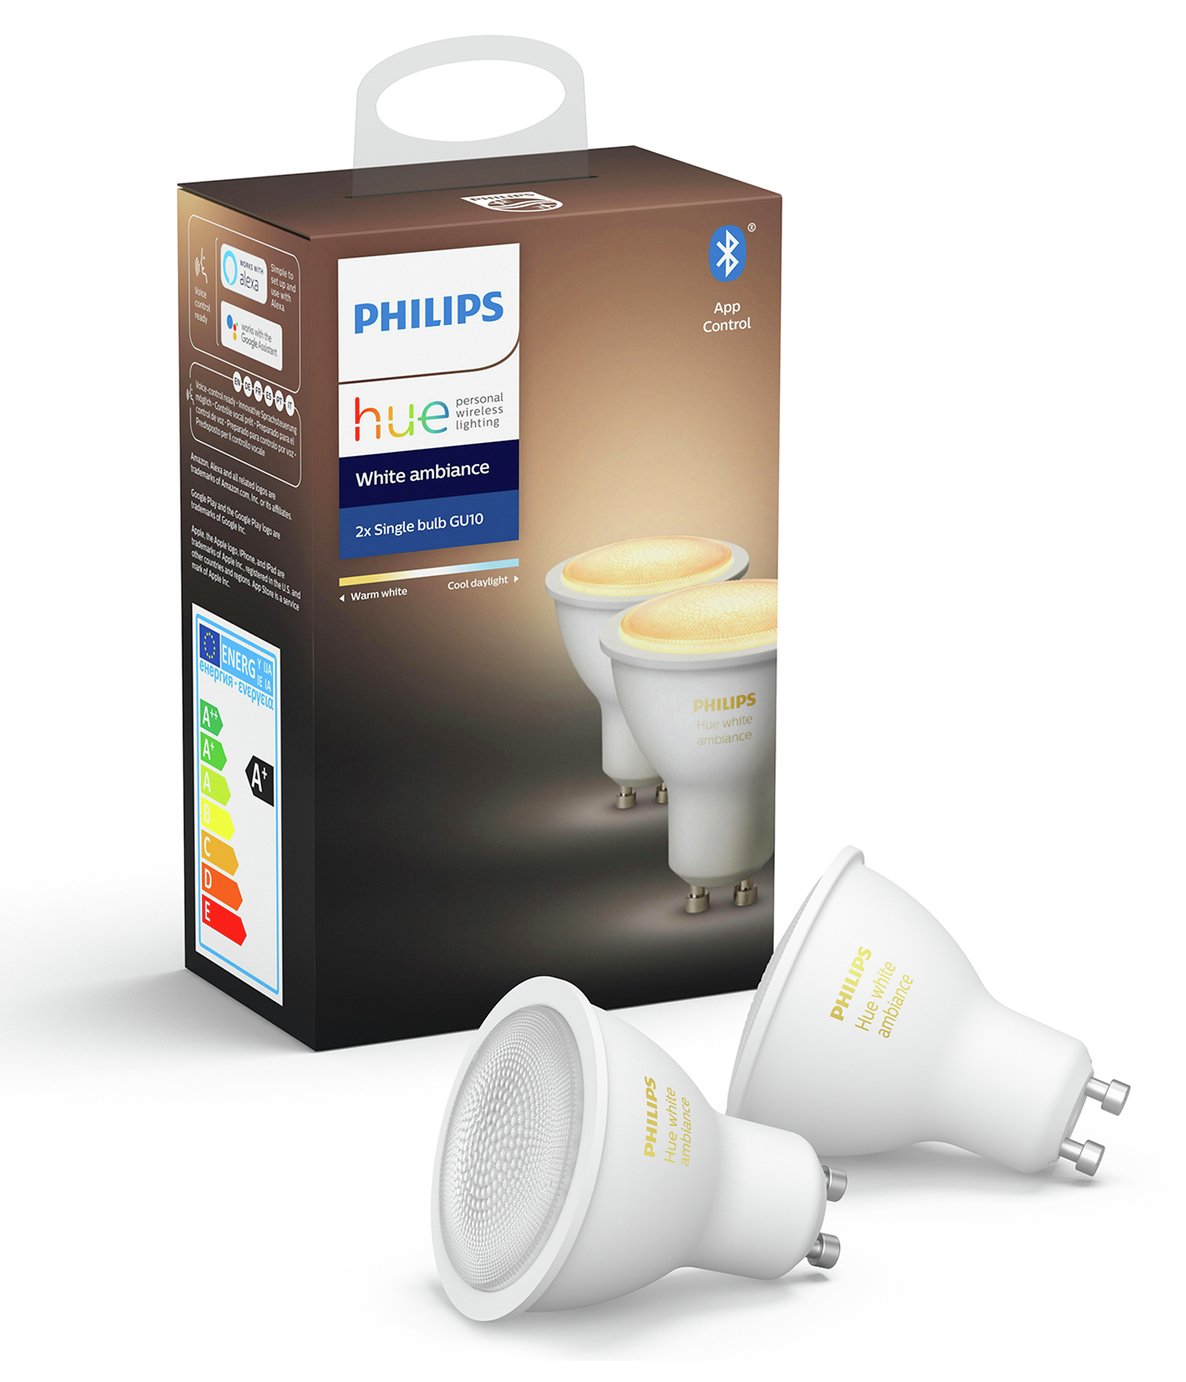 Philips Hue GU10 White Ambiance Smart Bulb with Bluetooth